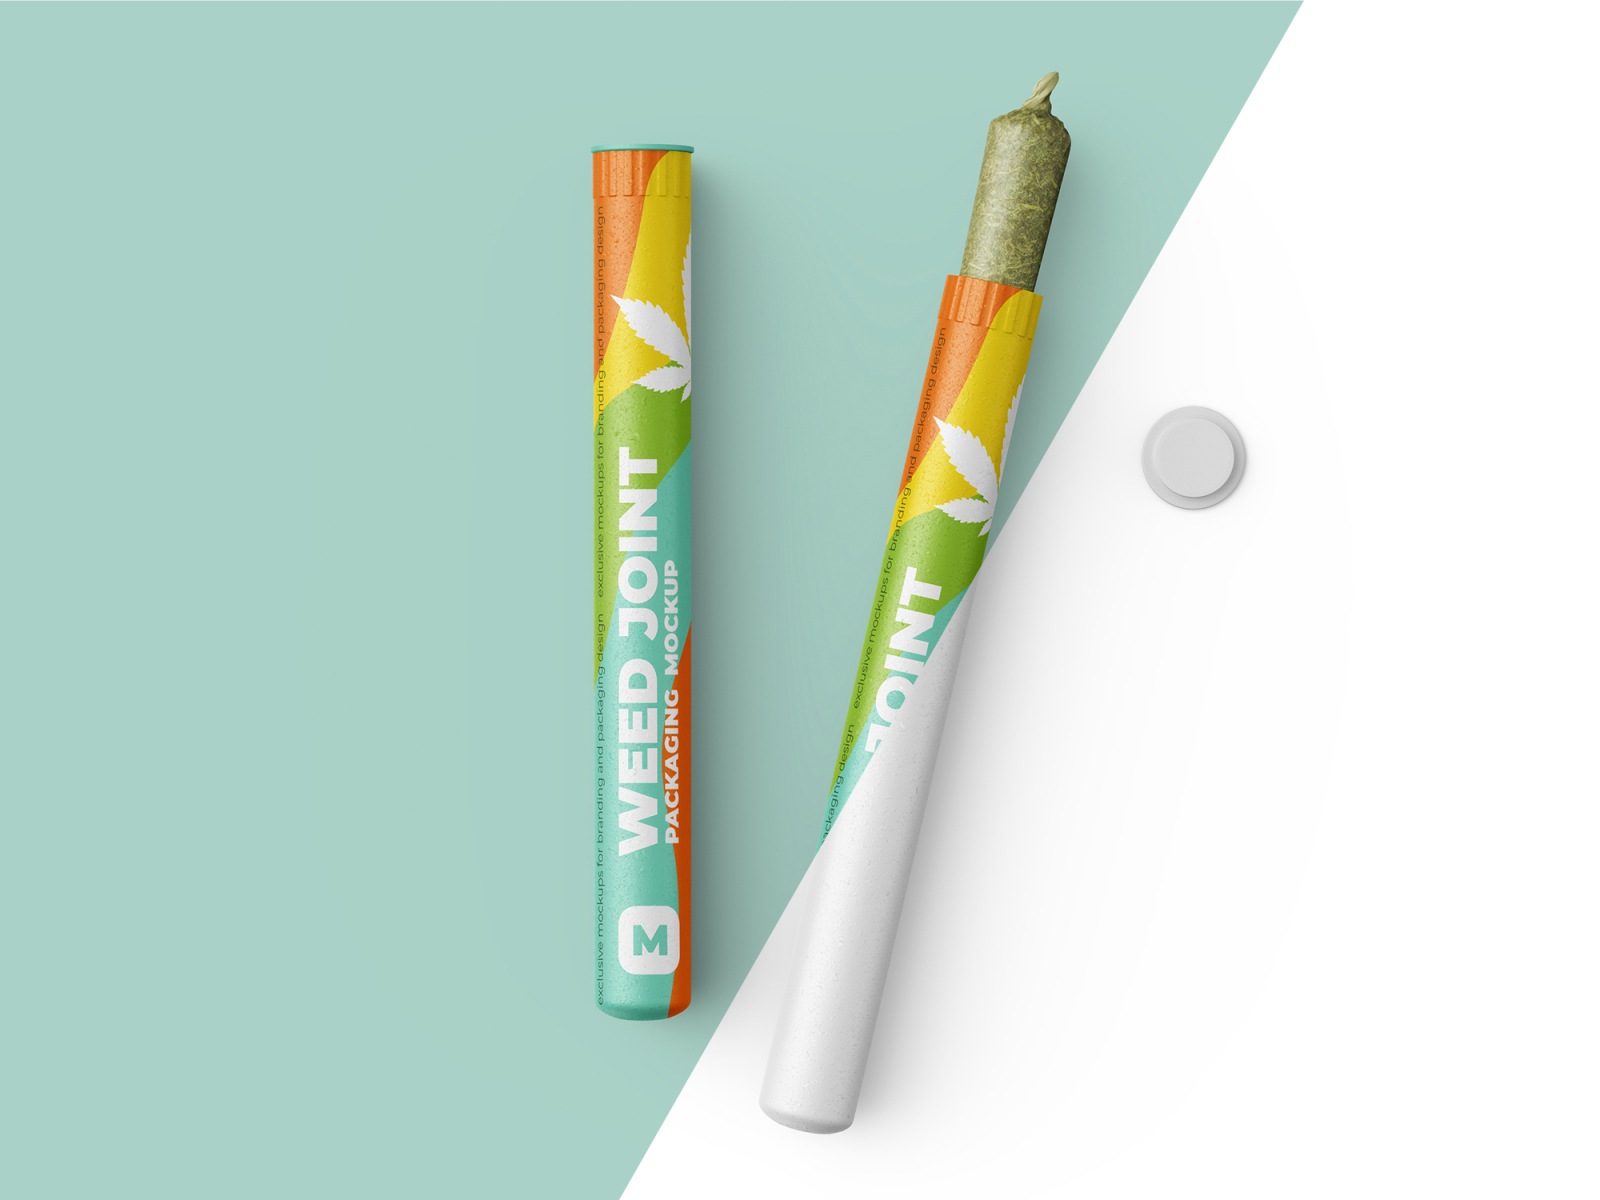 Download Weed Joint Pre Roll Tubes Mockup By Mock Up Ru On Dribbble